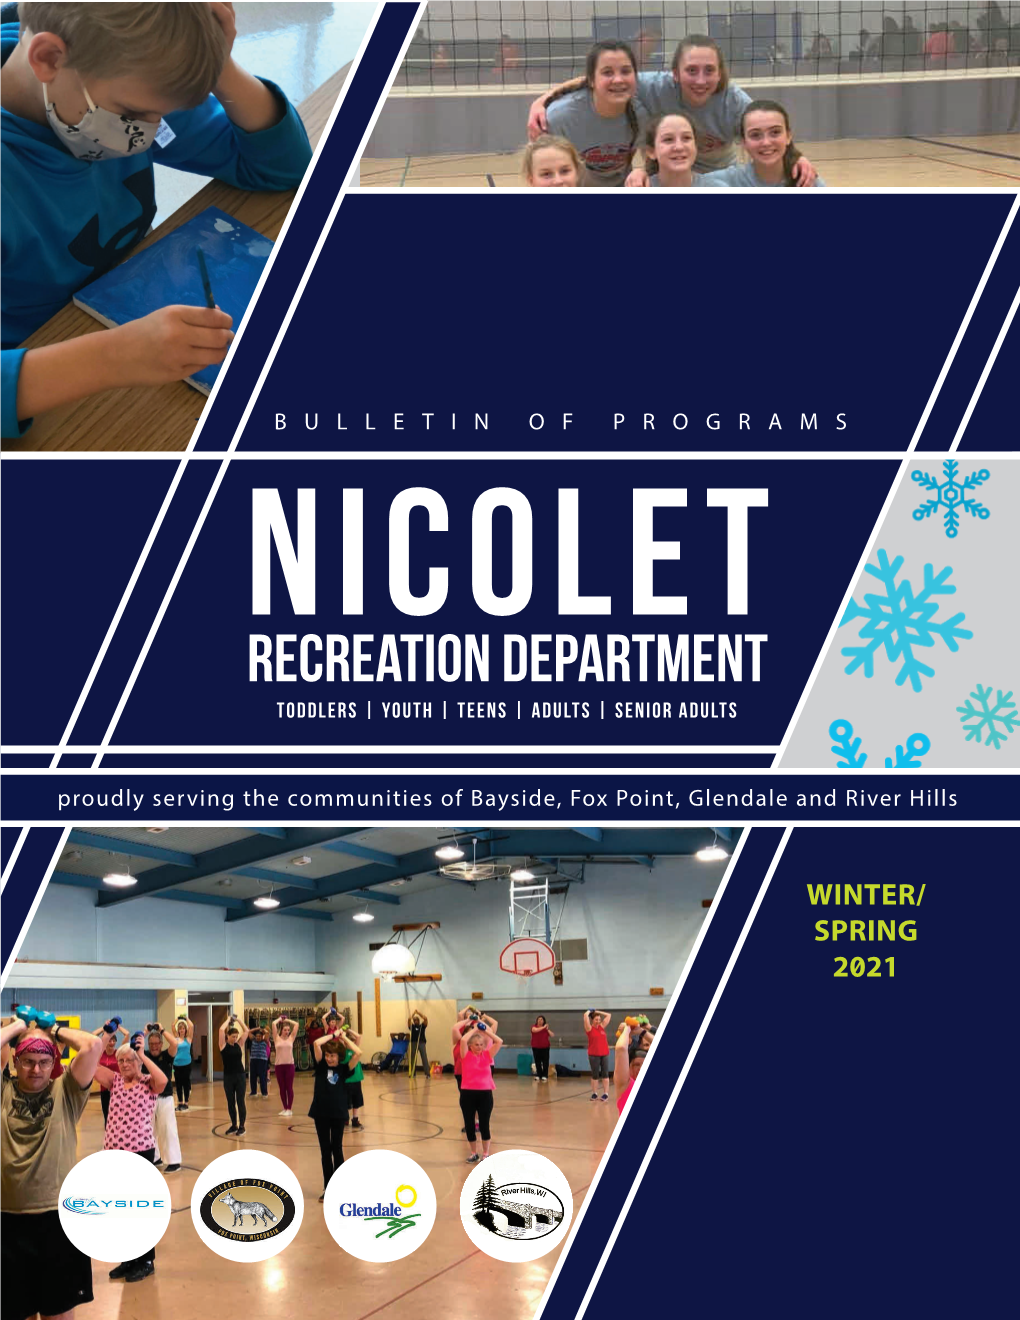 Recreation Department Toddlers | Youth | Teens | Adults | Senior Adults Proudly Serving the Communities of Bayside, Fox Point, Glendale and River Hills